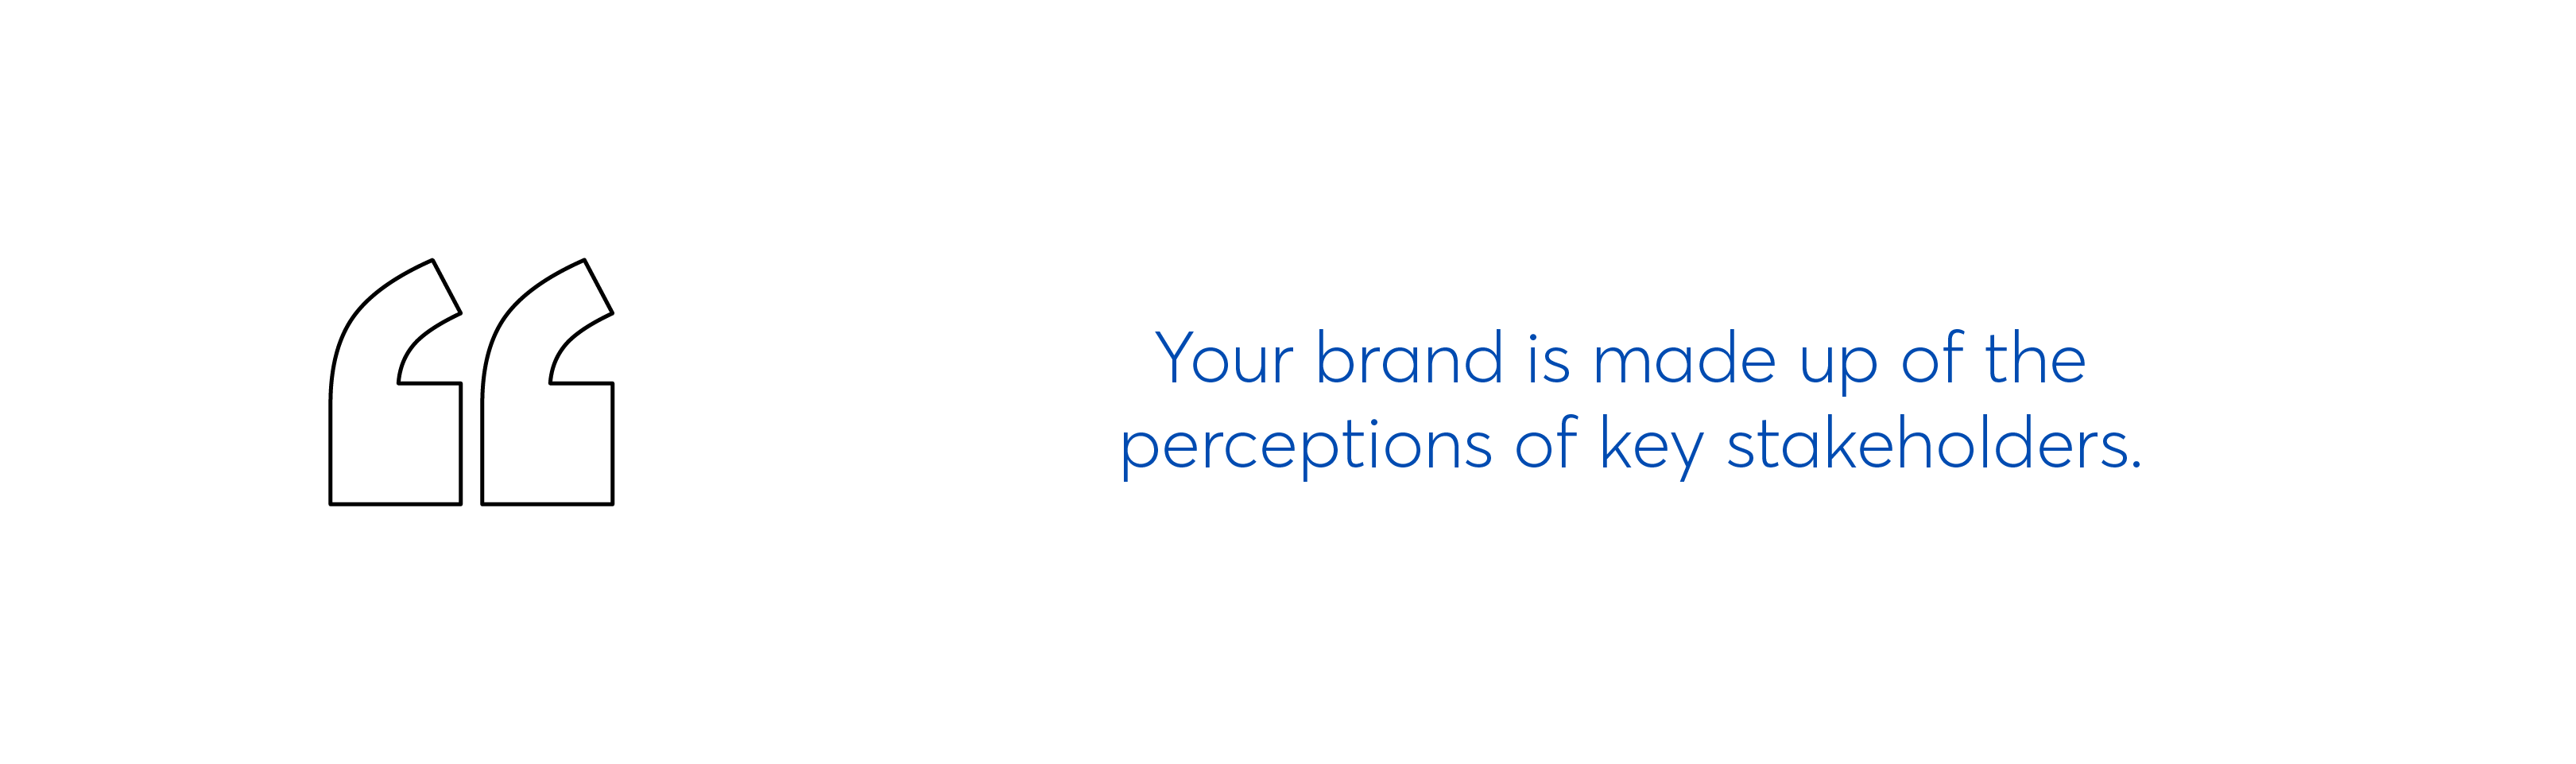 Your brand is made up by perceptions